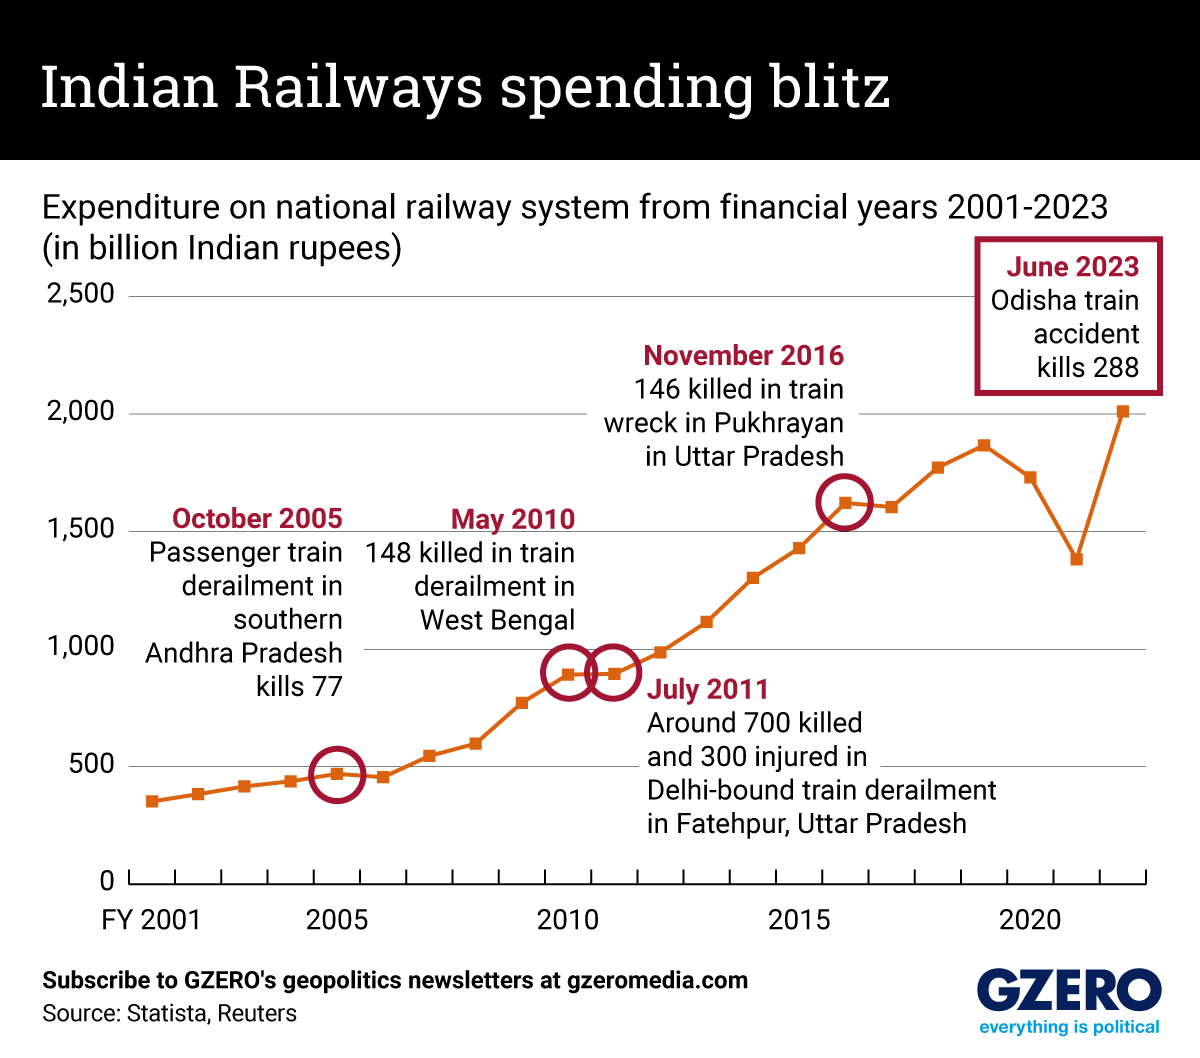 A graph comparing the Indian government's spending on the national railway system and key train accidents since 2001.